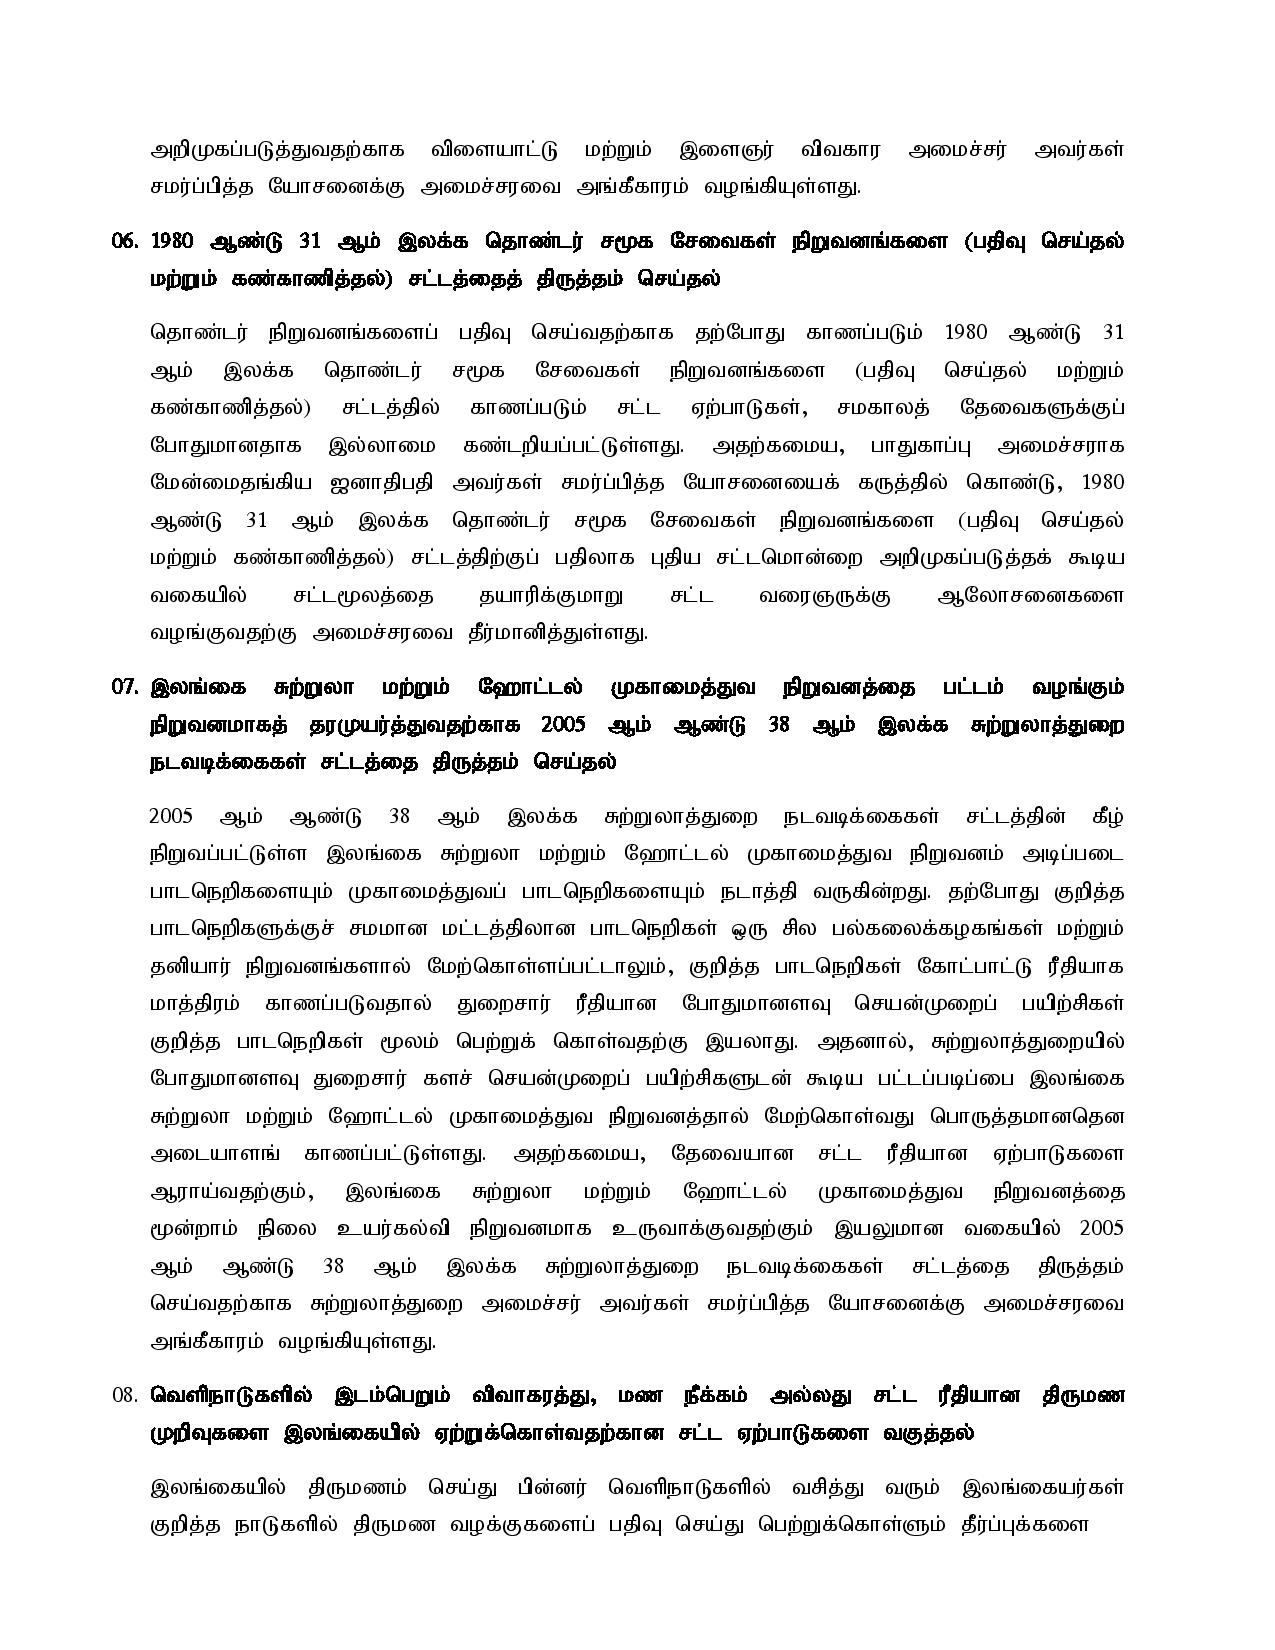 Cabinet Decision on 2021.08.09 Tamil page 003